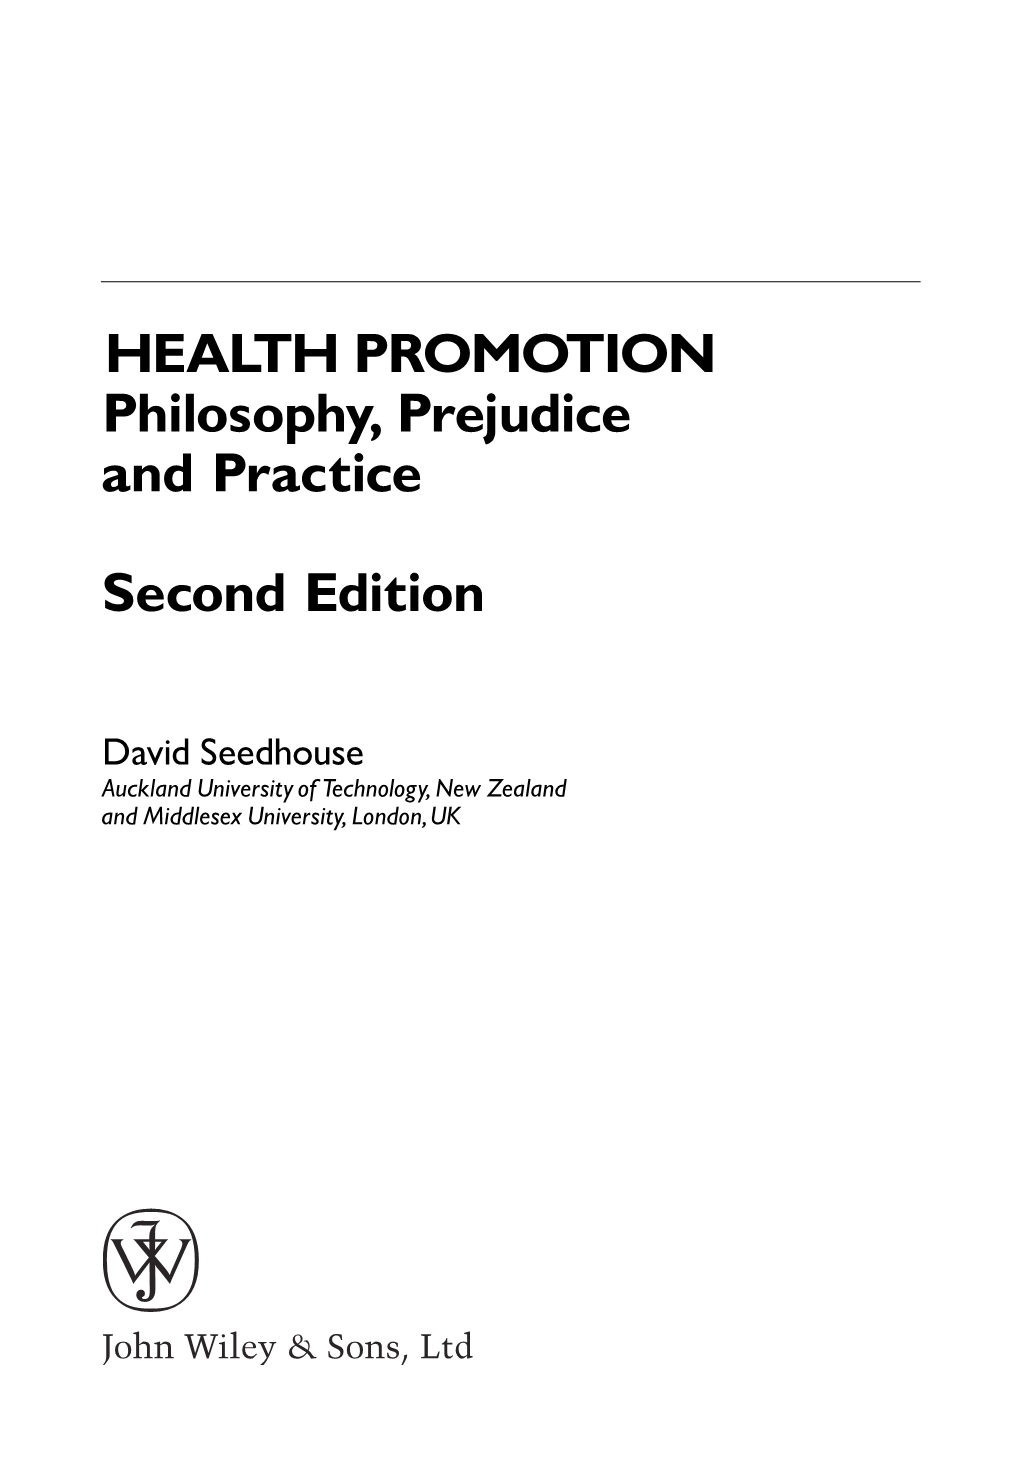 HEALTH PROMOTION Philosophy, Prejudice and Practice Second